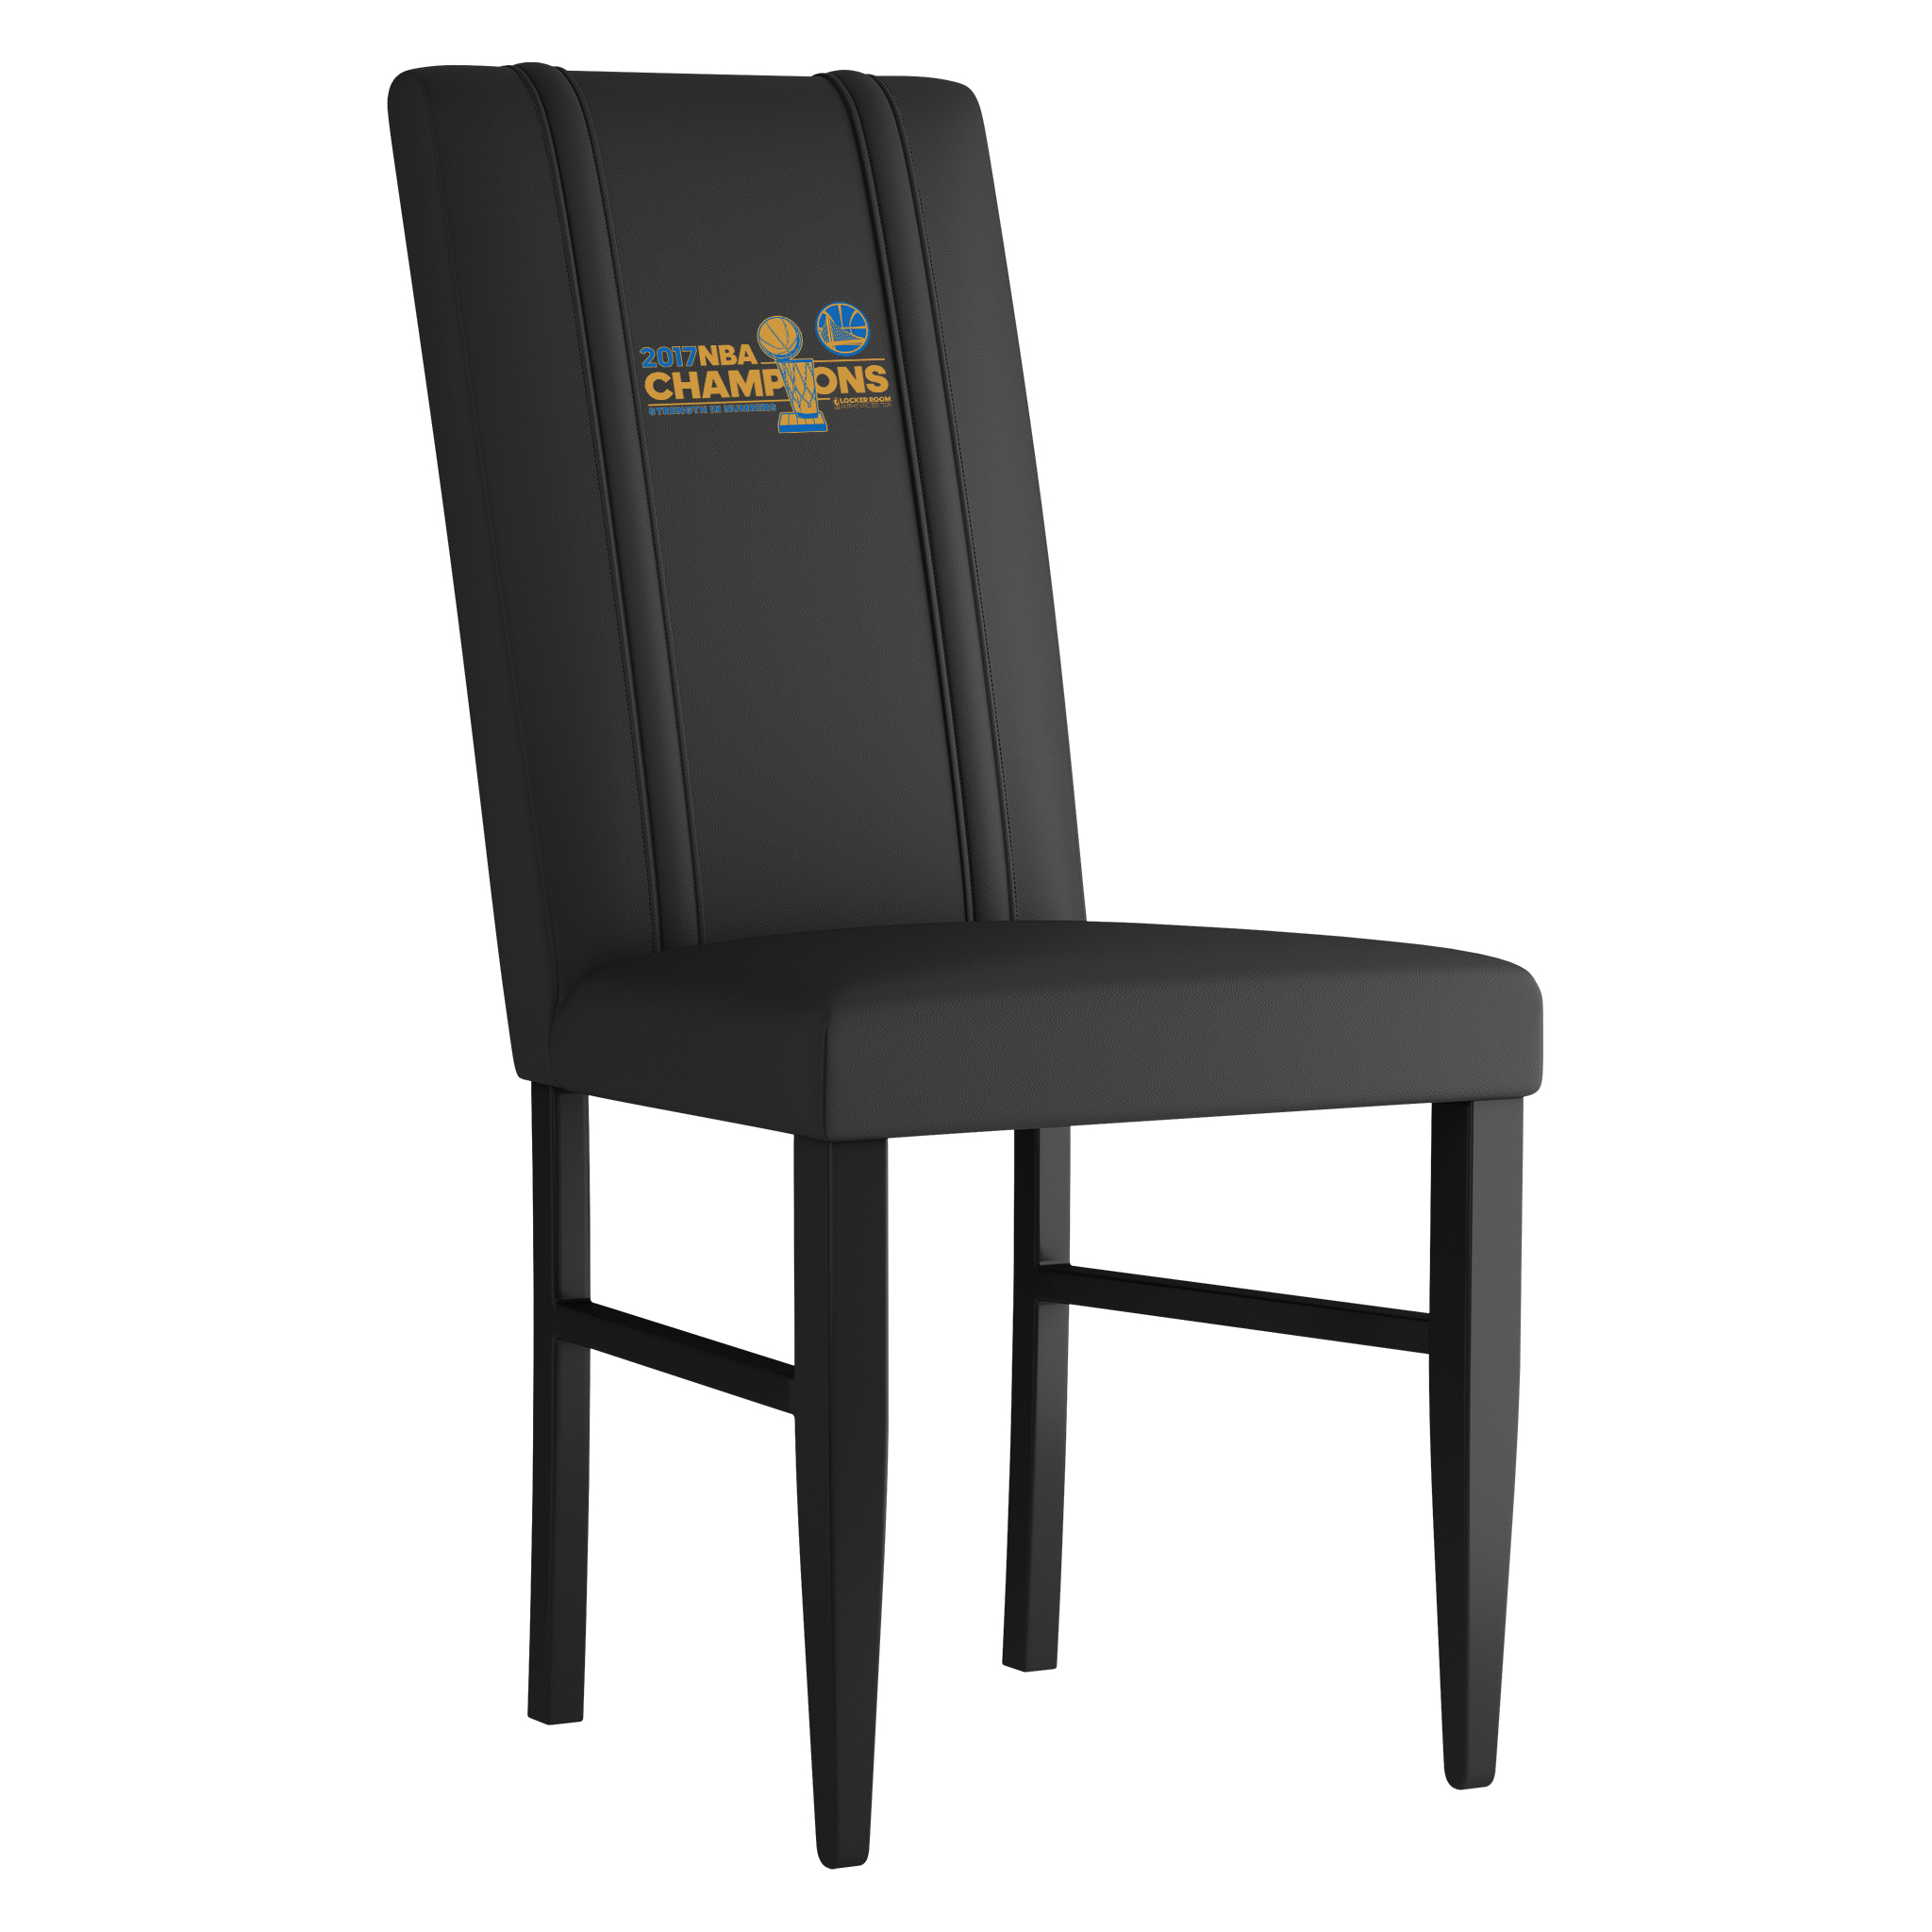 Golden State Warriors Side Chair 2000 With Golden State Warriors Champions Logo